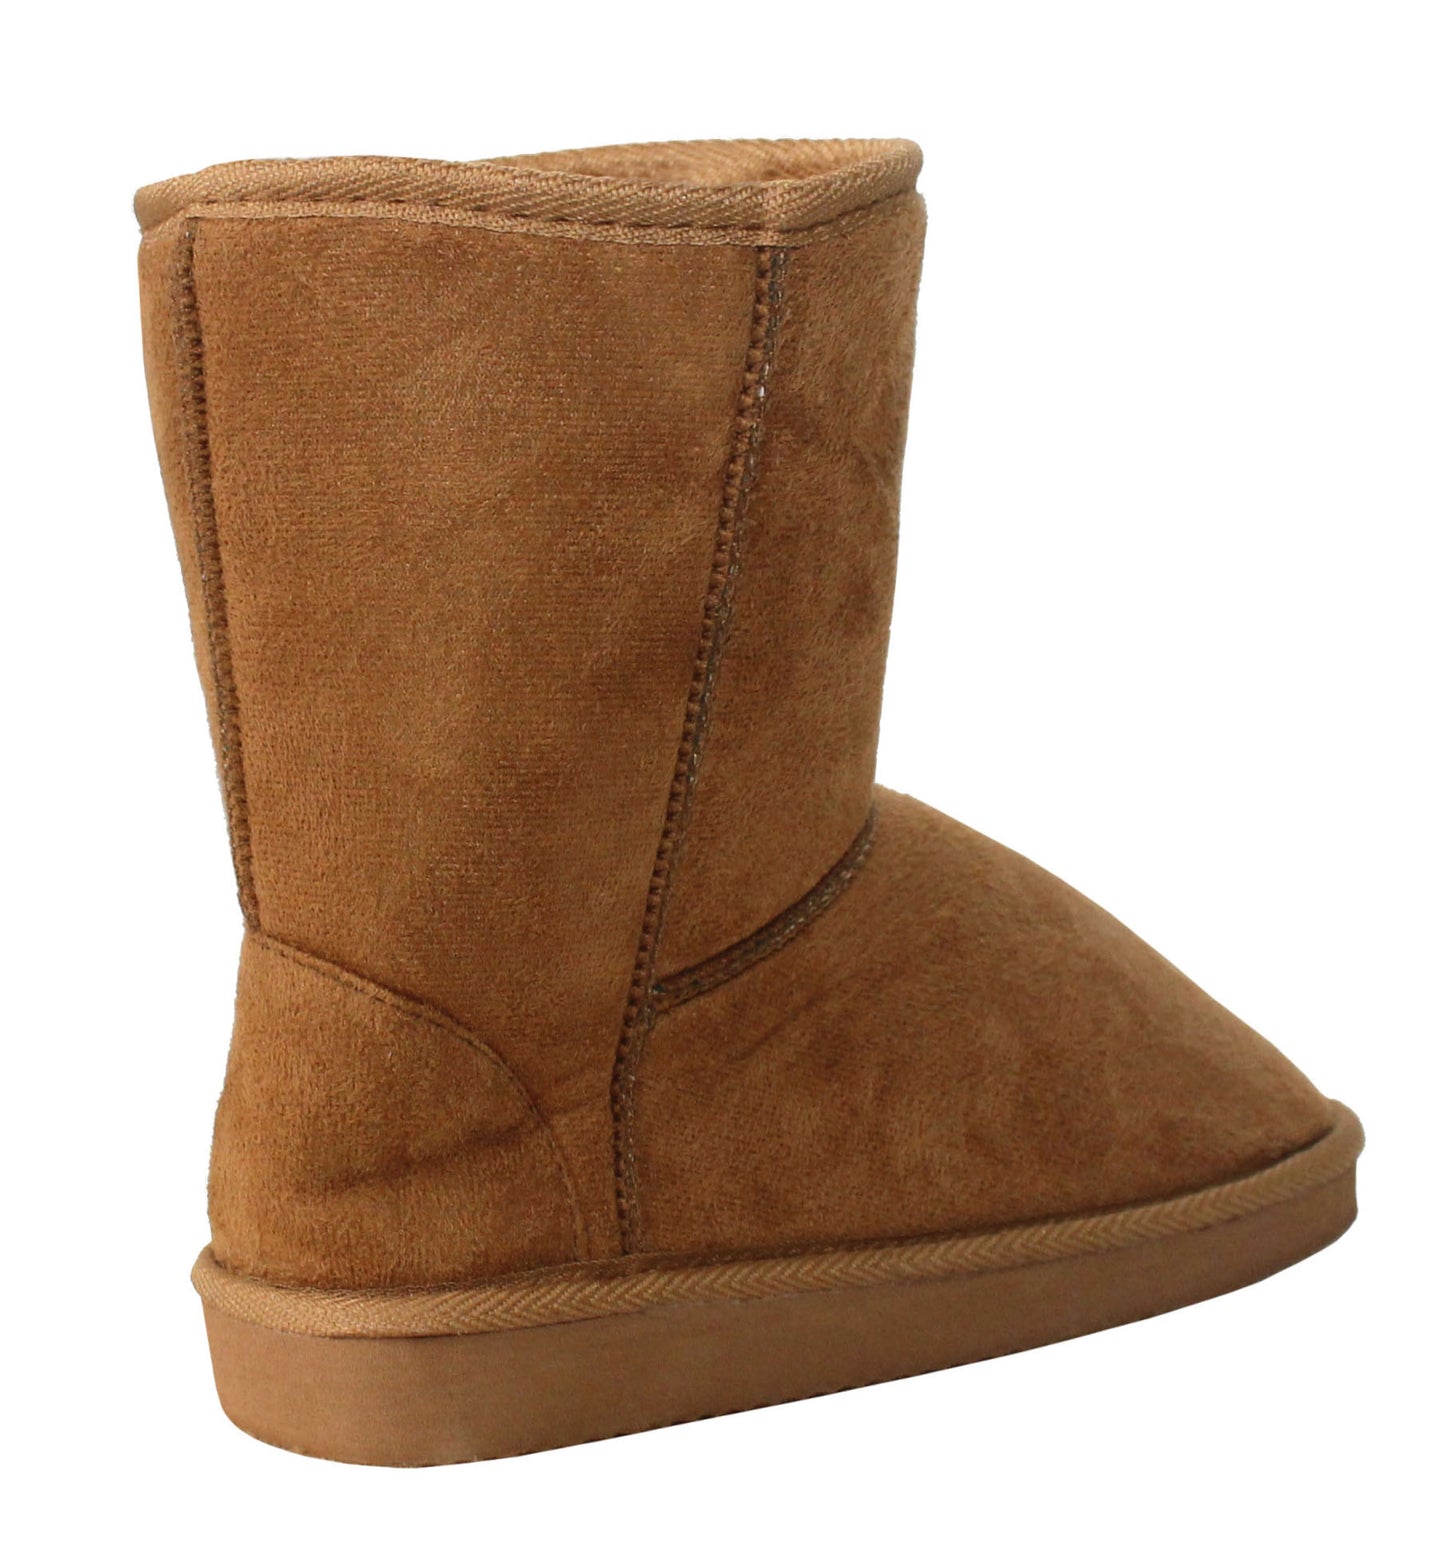 Girls Youth Kids Faux Suede Warm Fur Lined Slip On Mid Calf Snow Winter Tan Boots